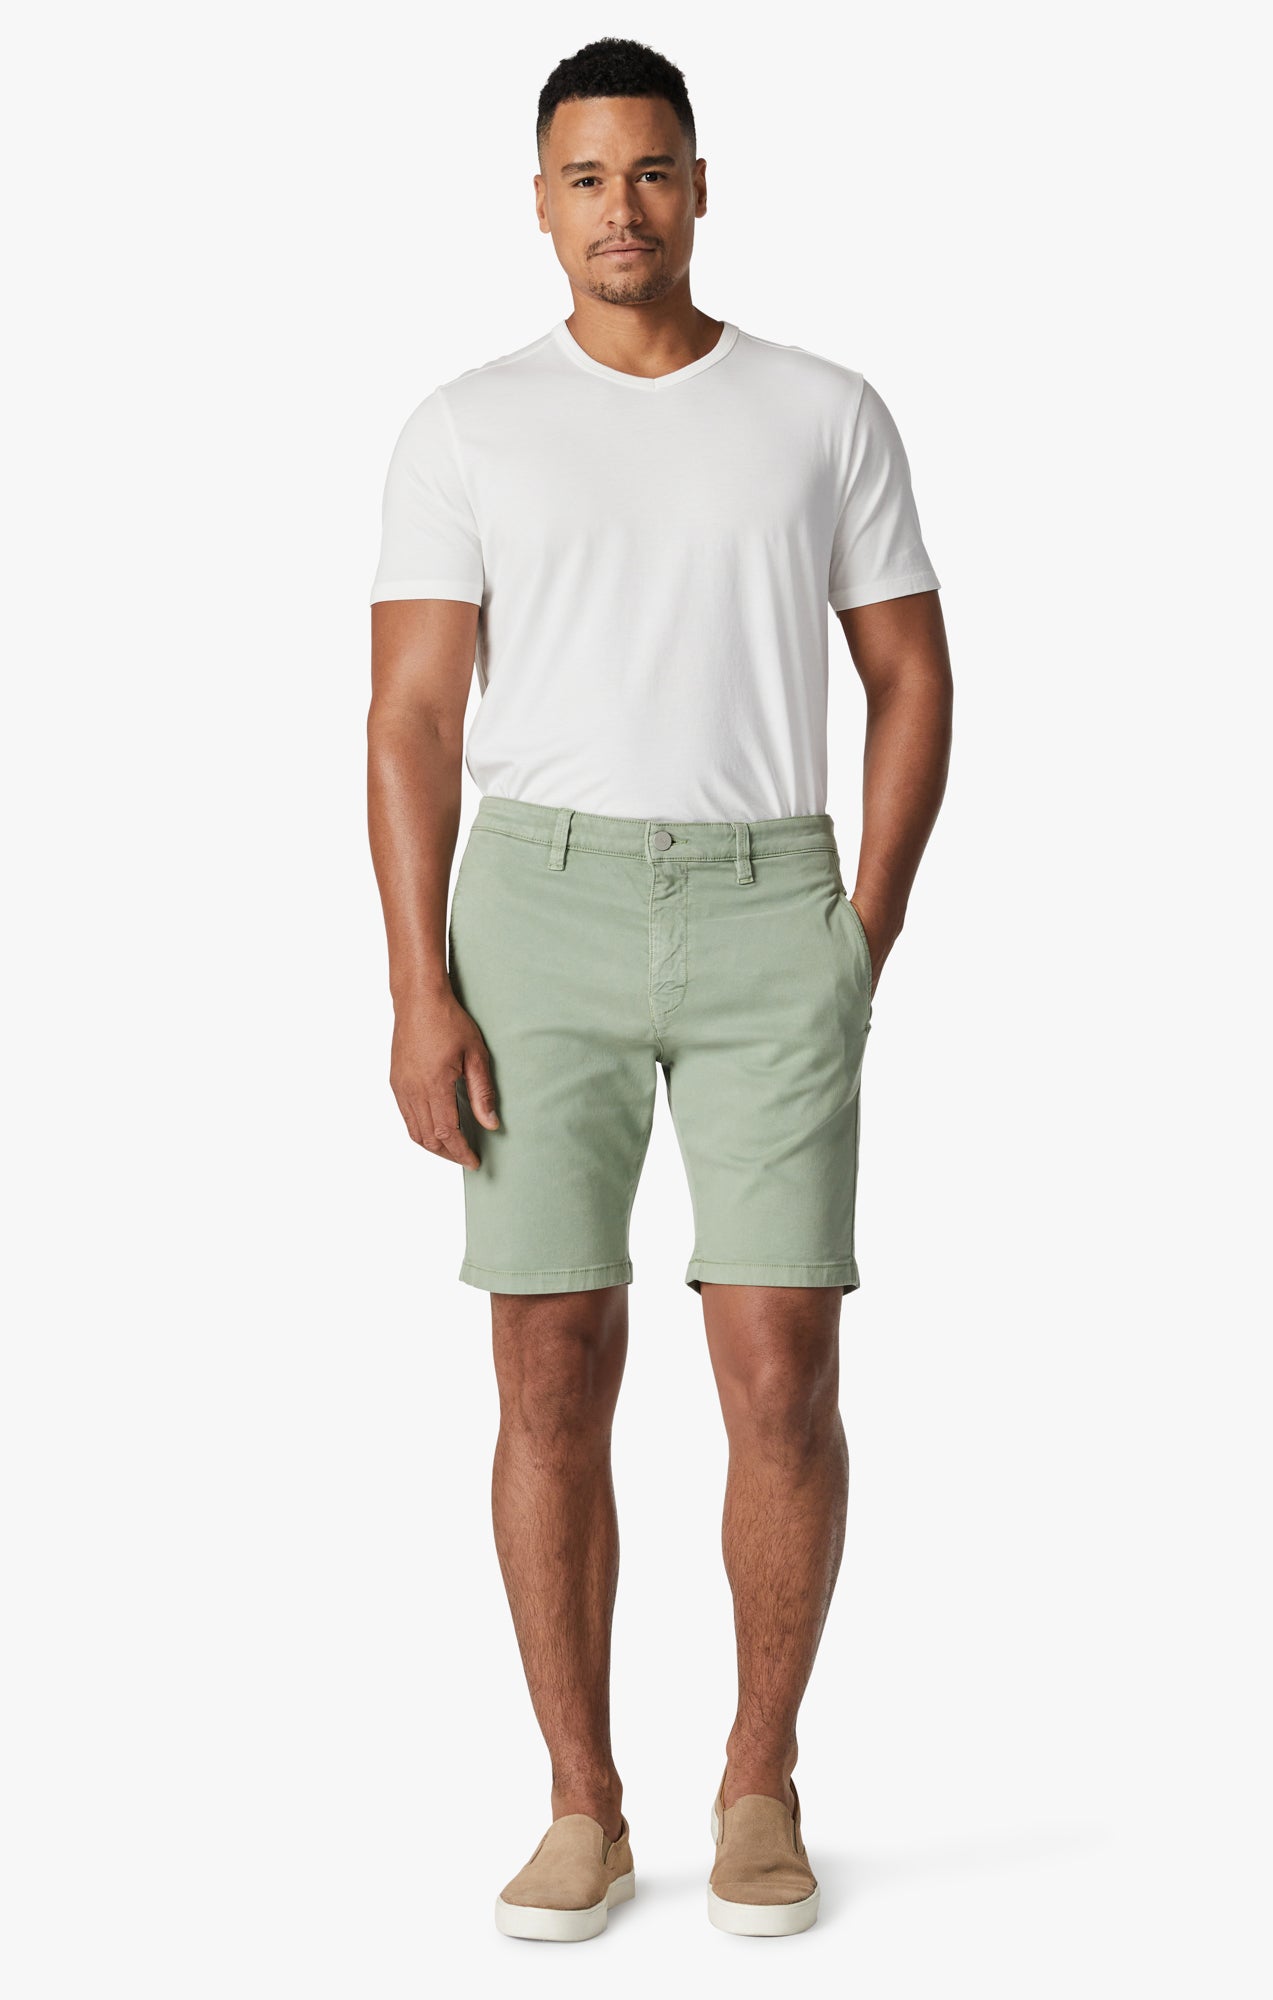 Nevada Shorts in Green Soft Touch Image 1